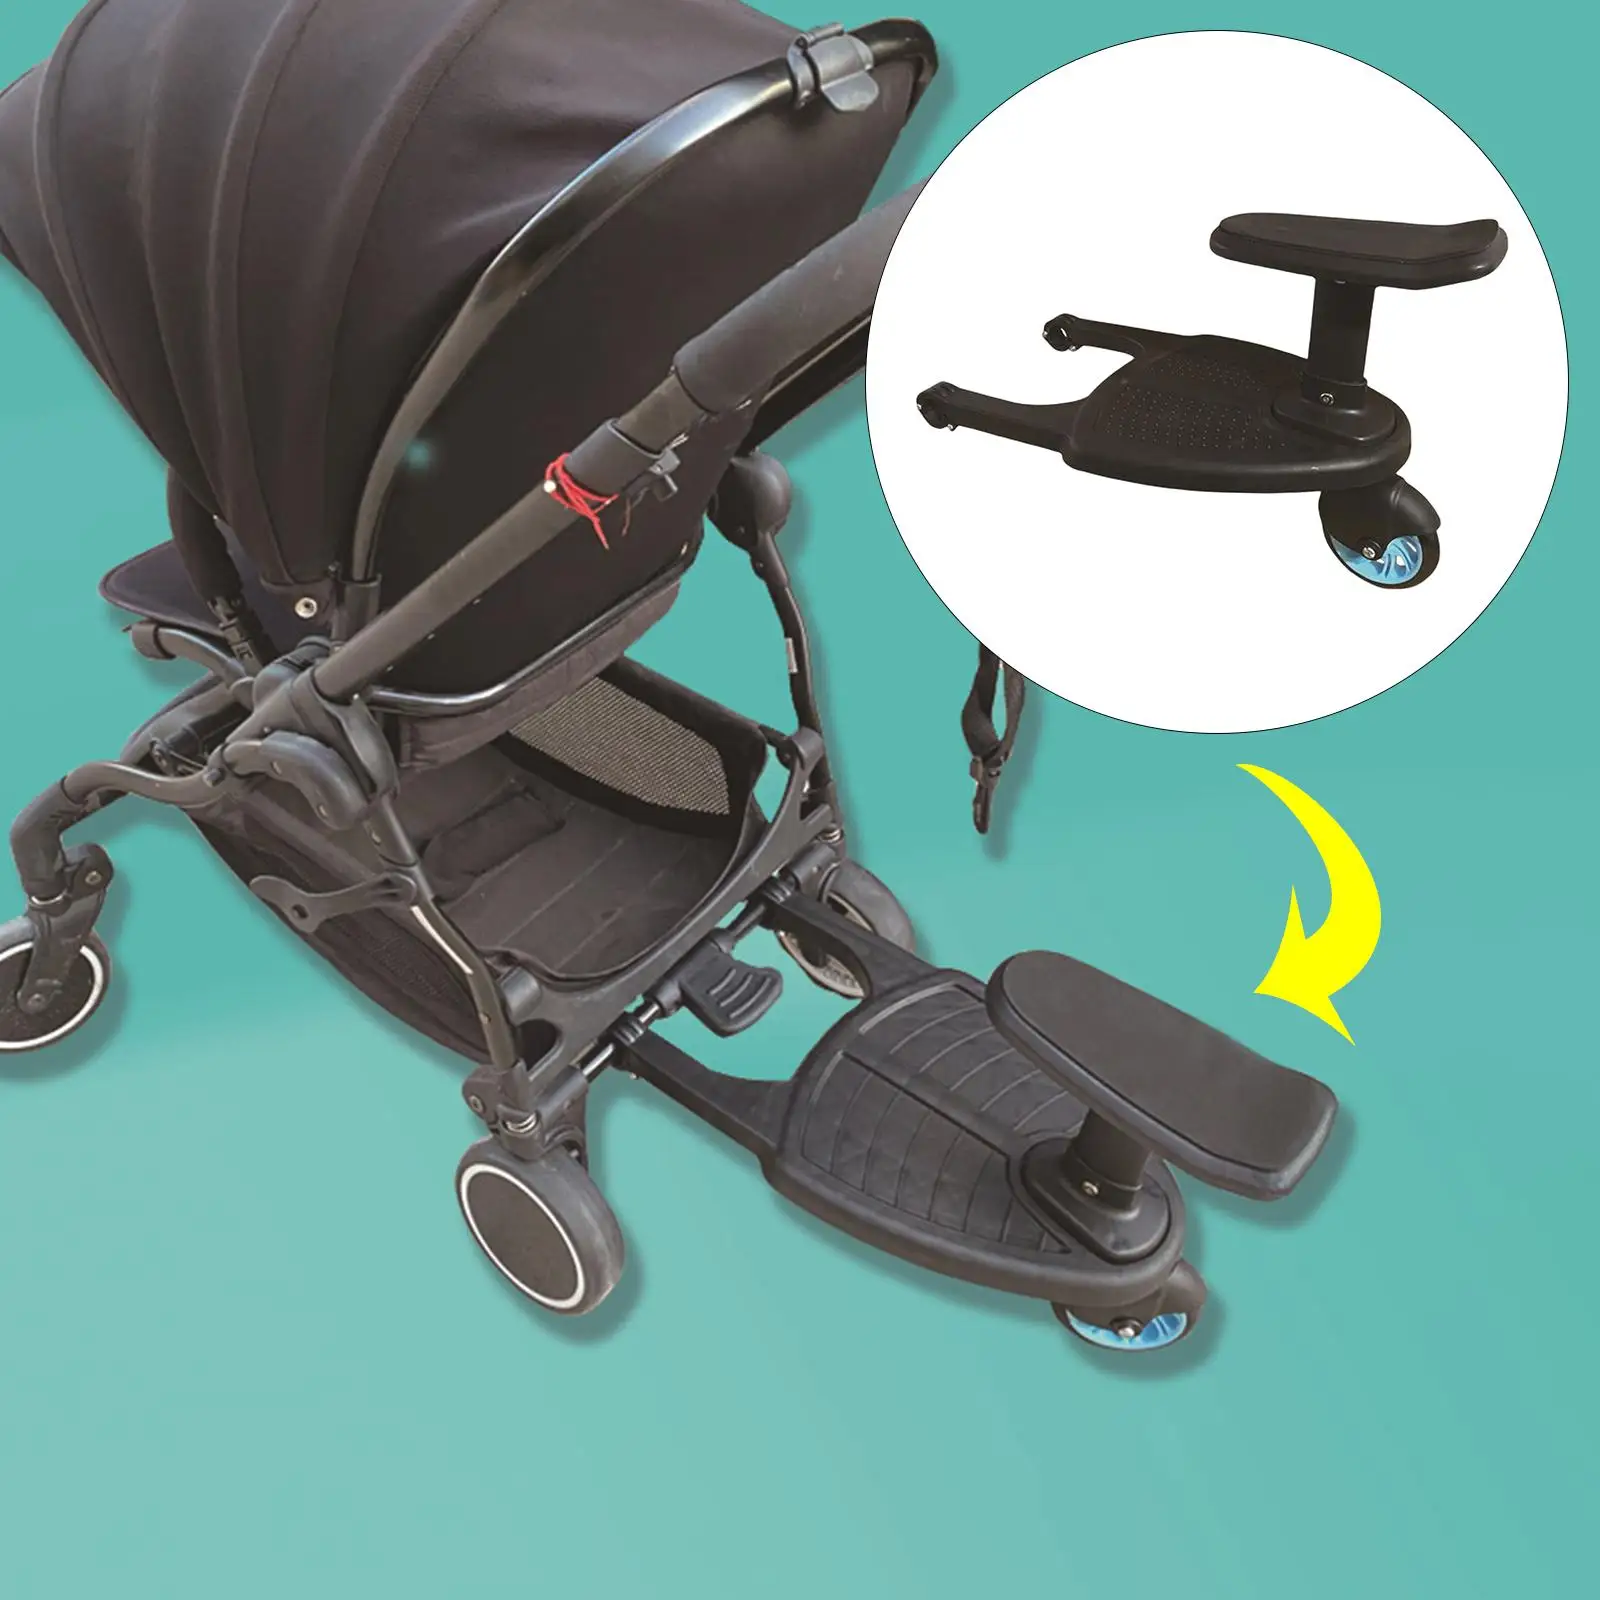 Universal Baby Stroller Auxiliary Pedal Stroller Attachments Stroller Board